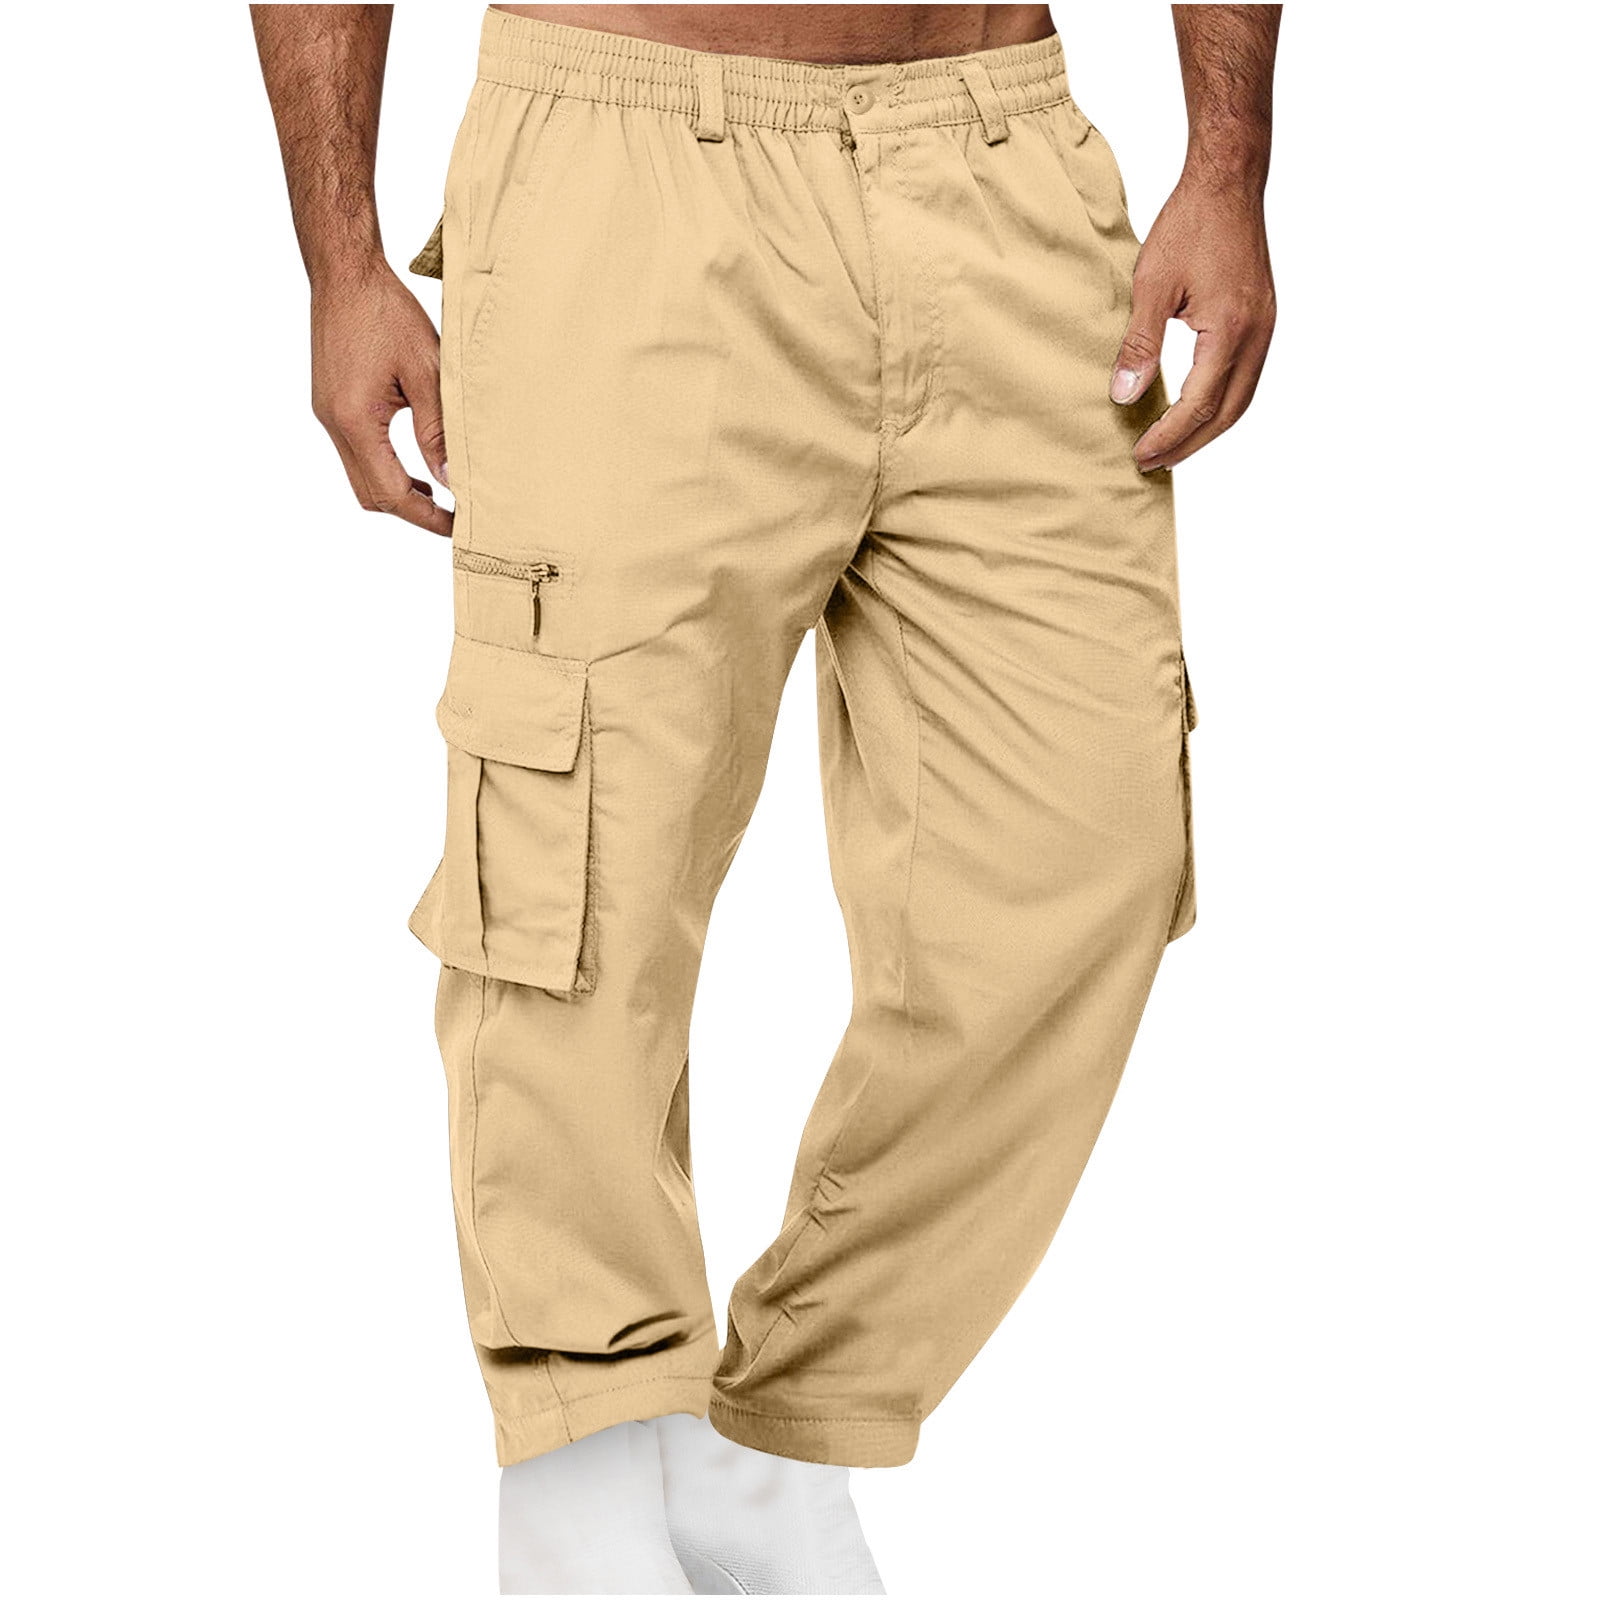 Ayolanni Khaki Cargo Pants for Mens Loose Twill Trouser with Multi ...